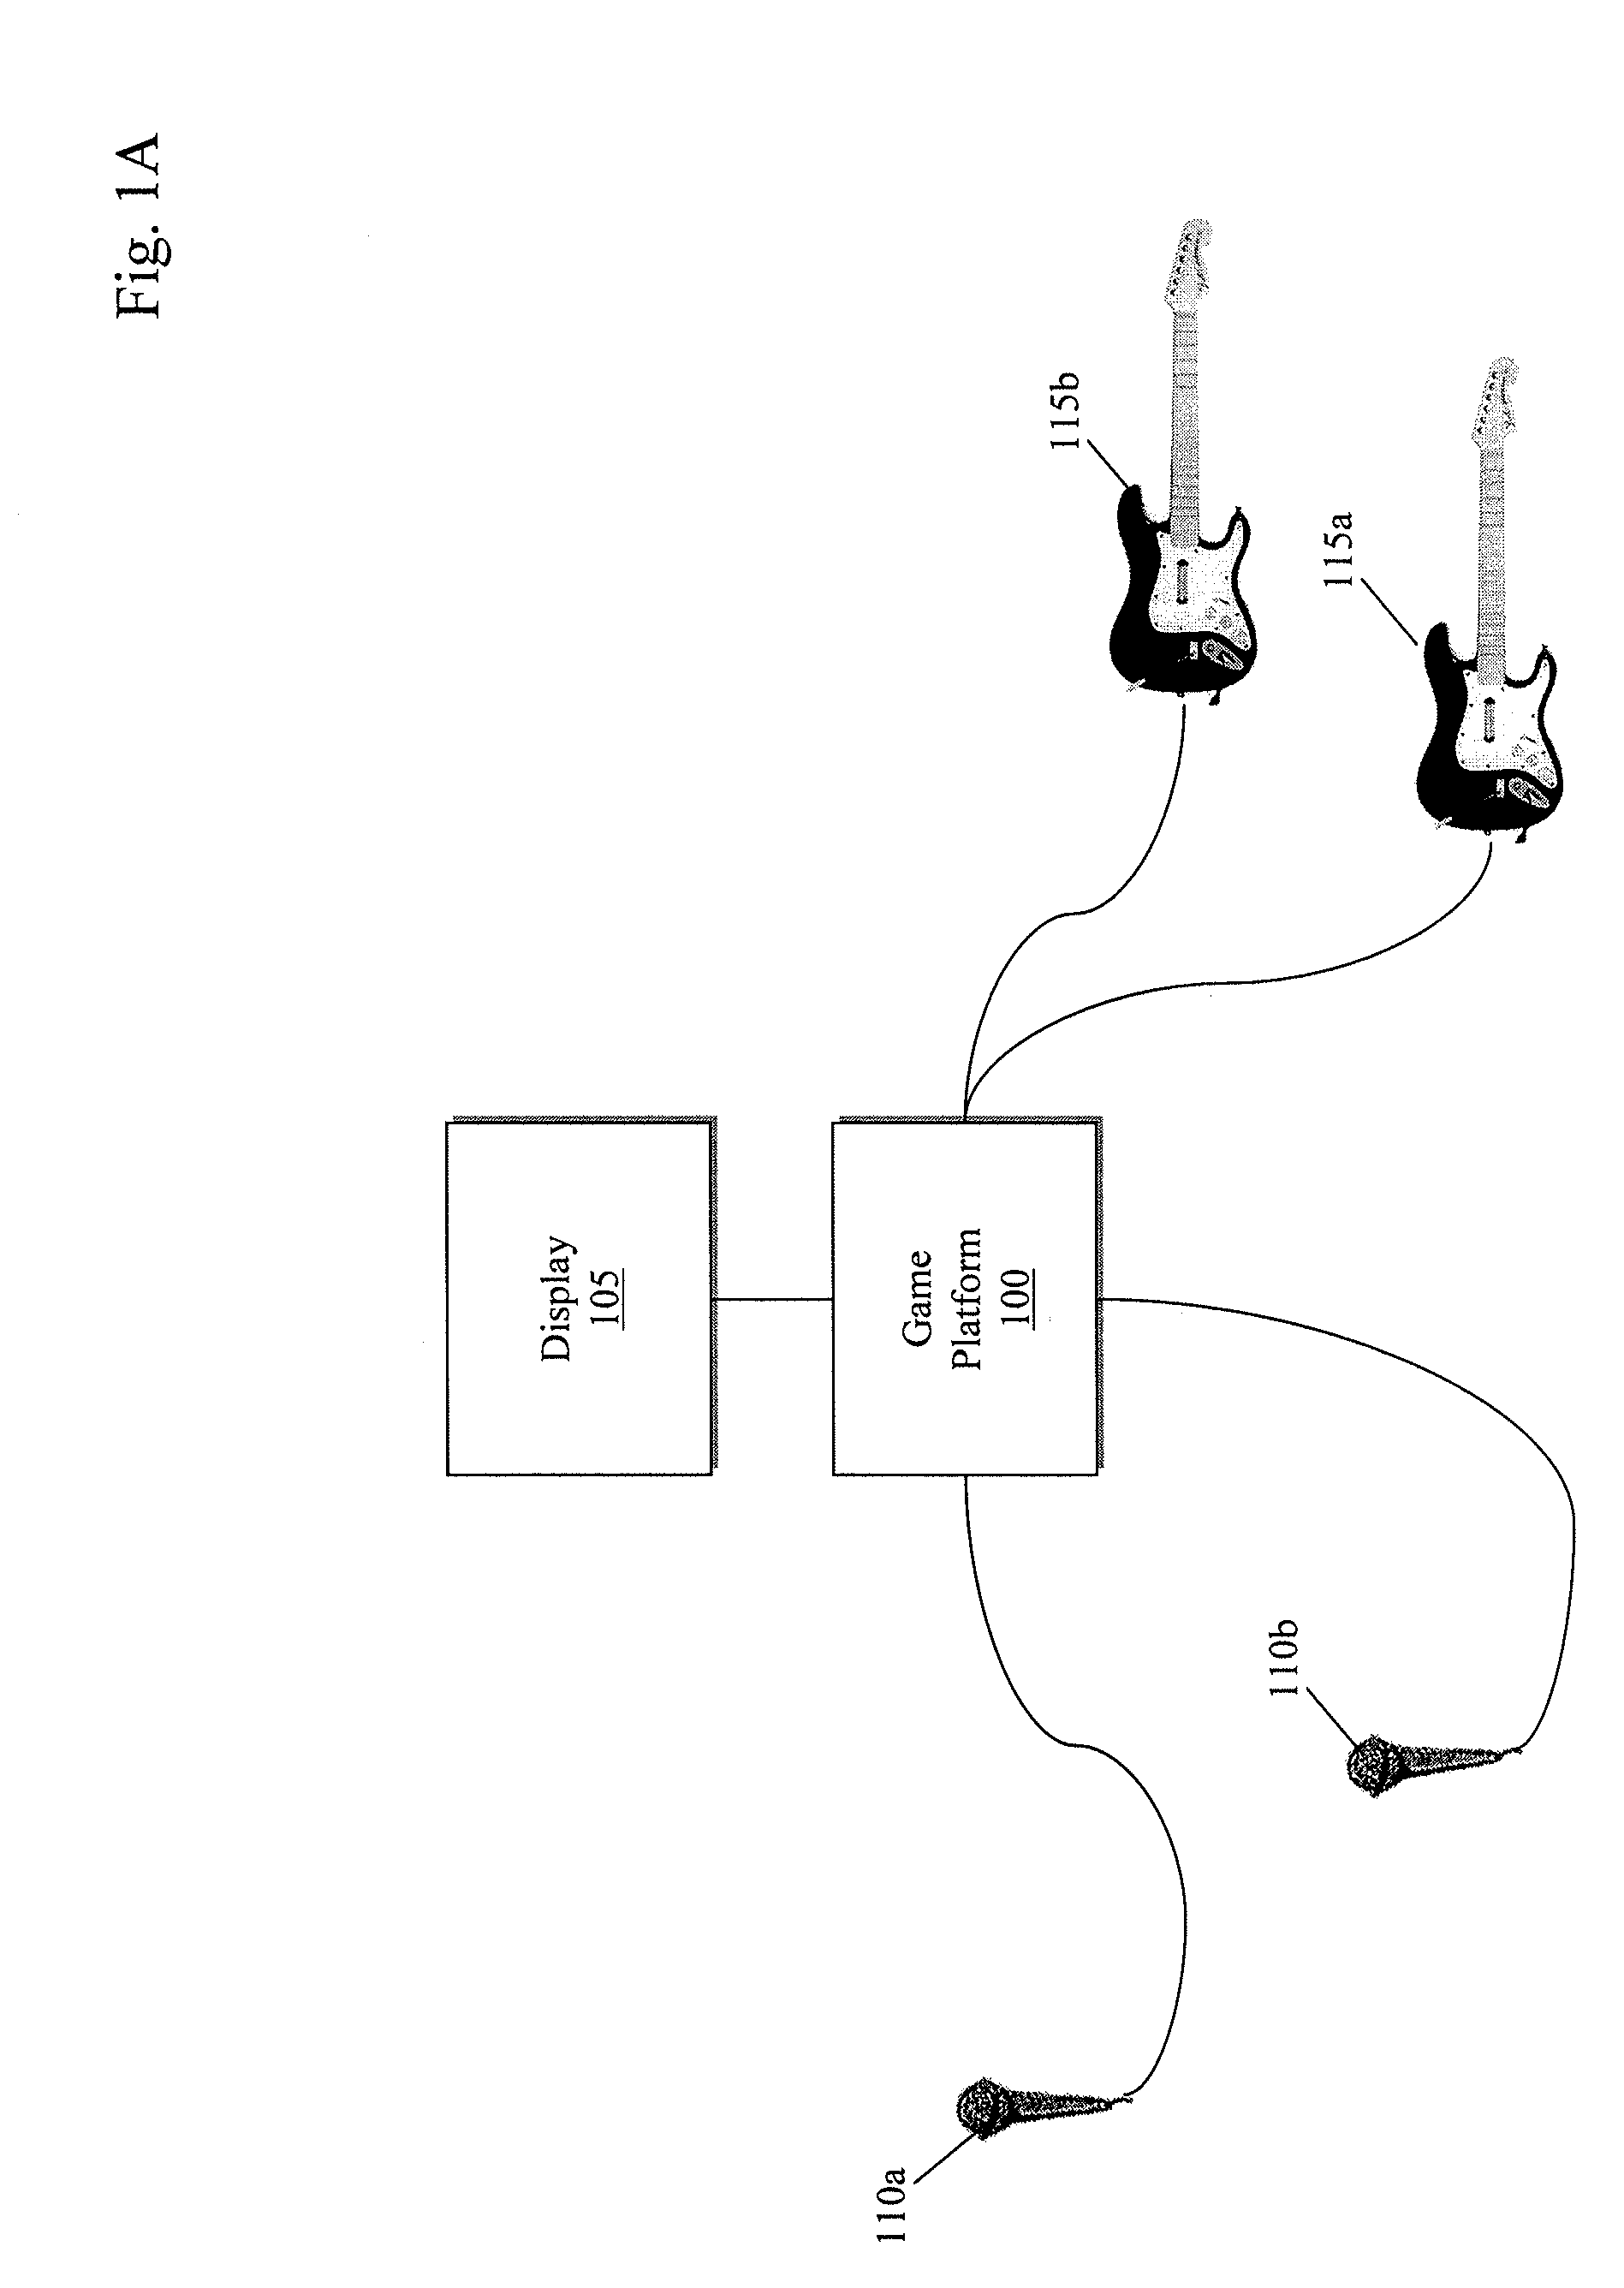 Biasing a musical performance input to a part